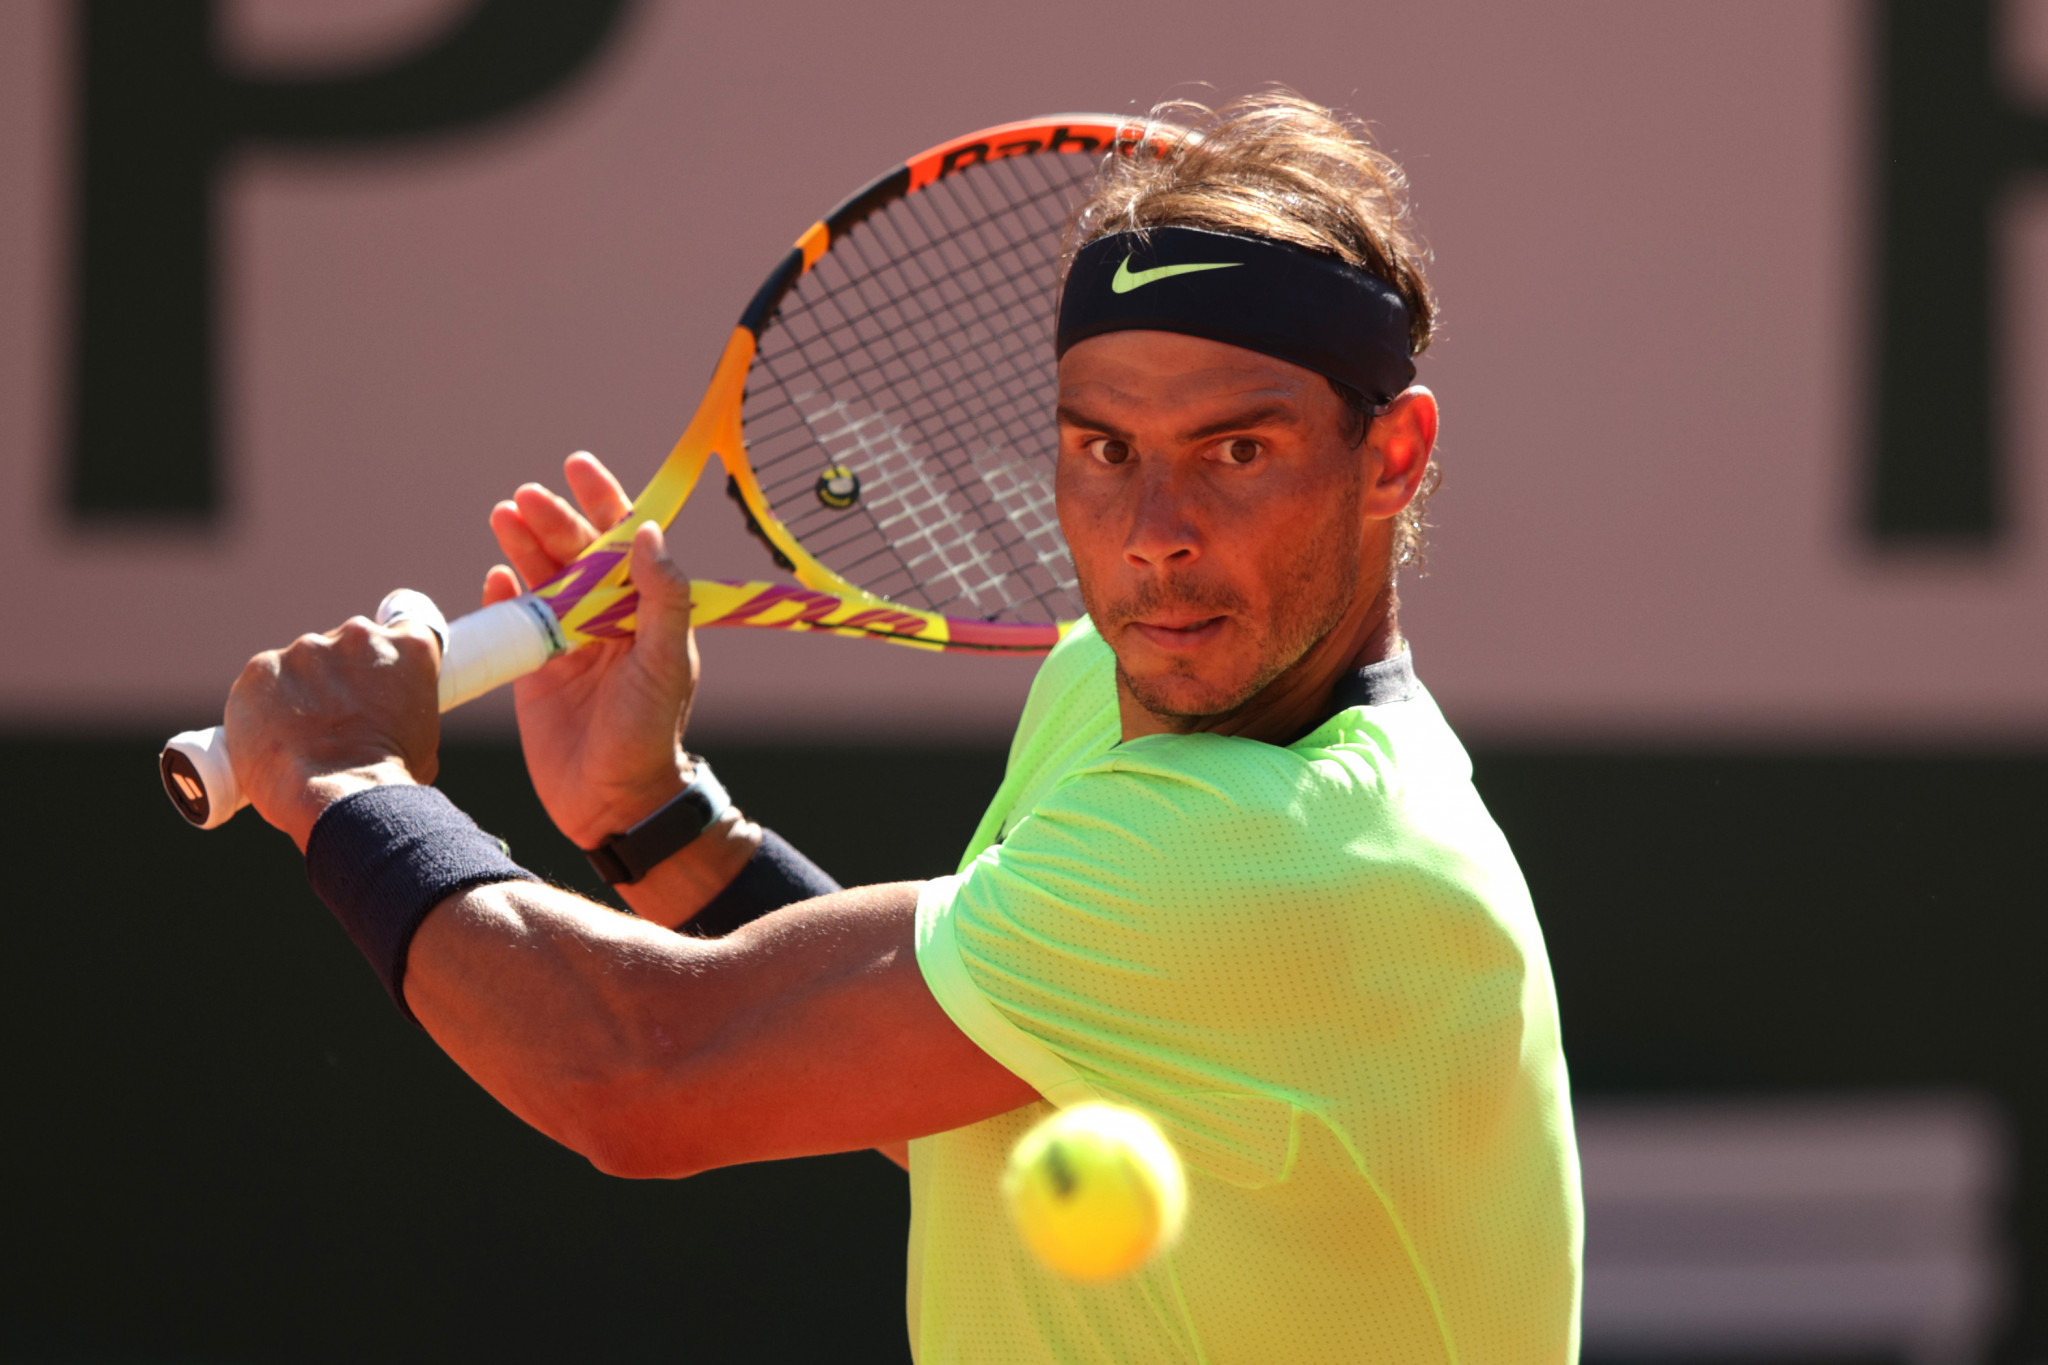 Defending champion Nadal eases through opening test at French Open